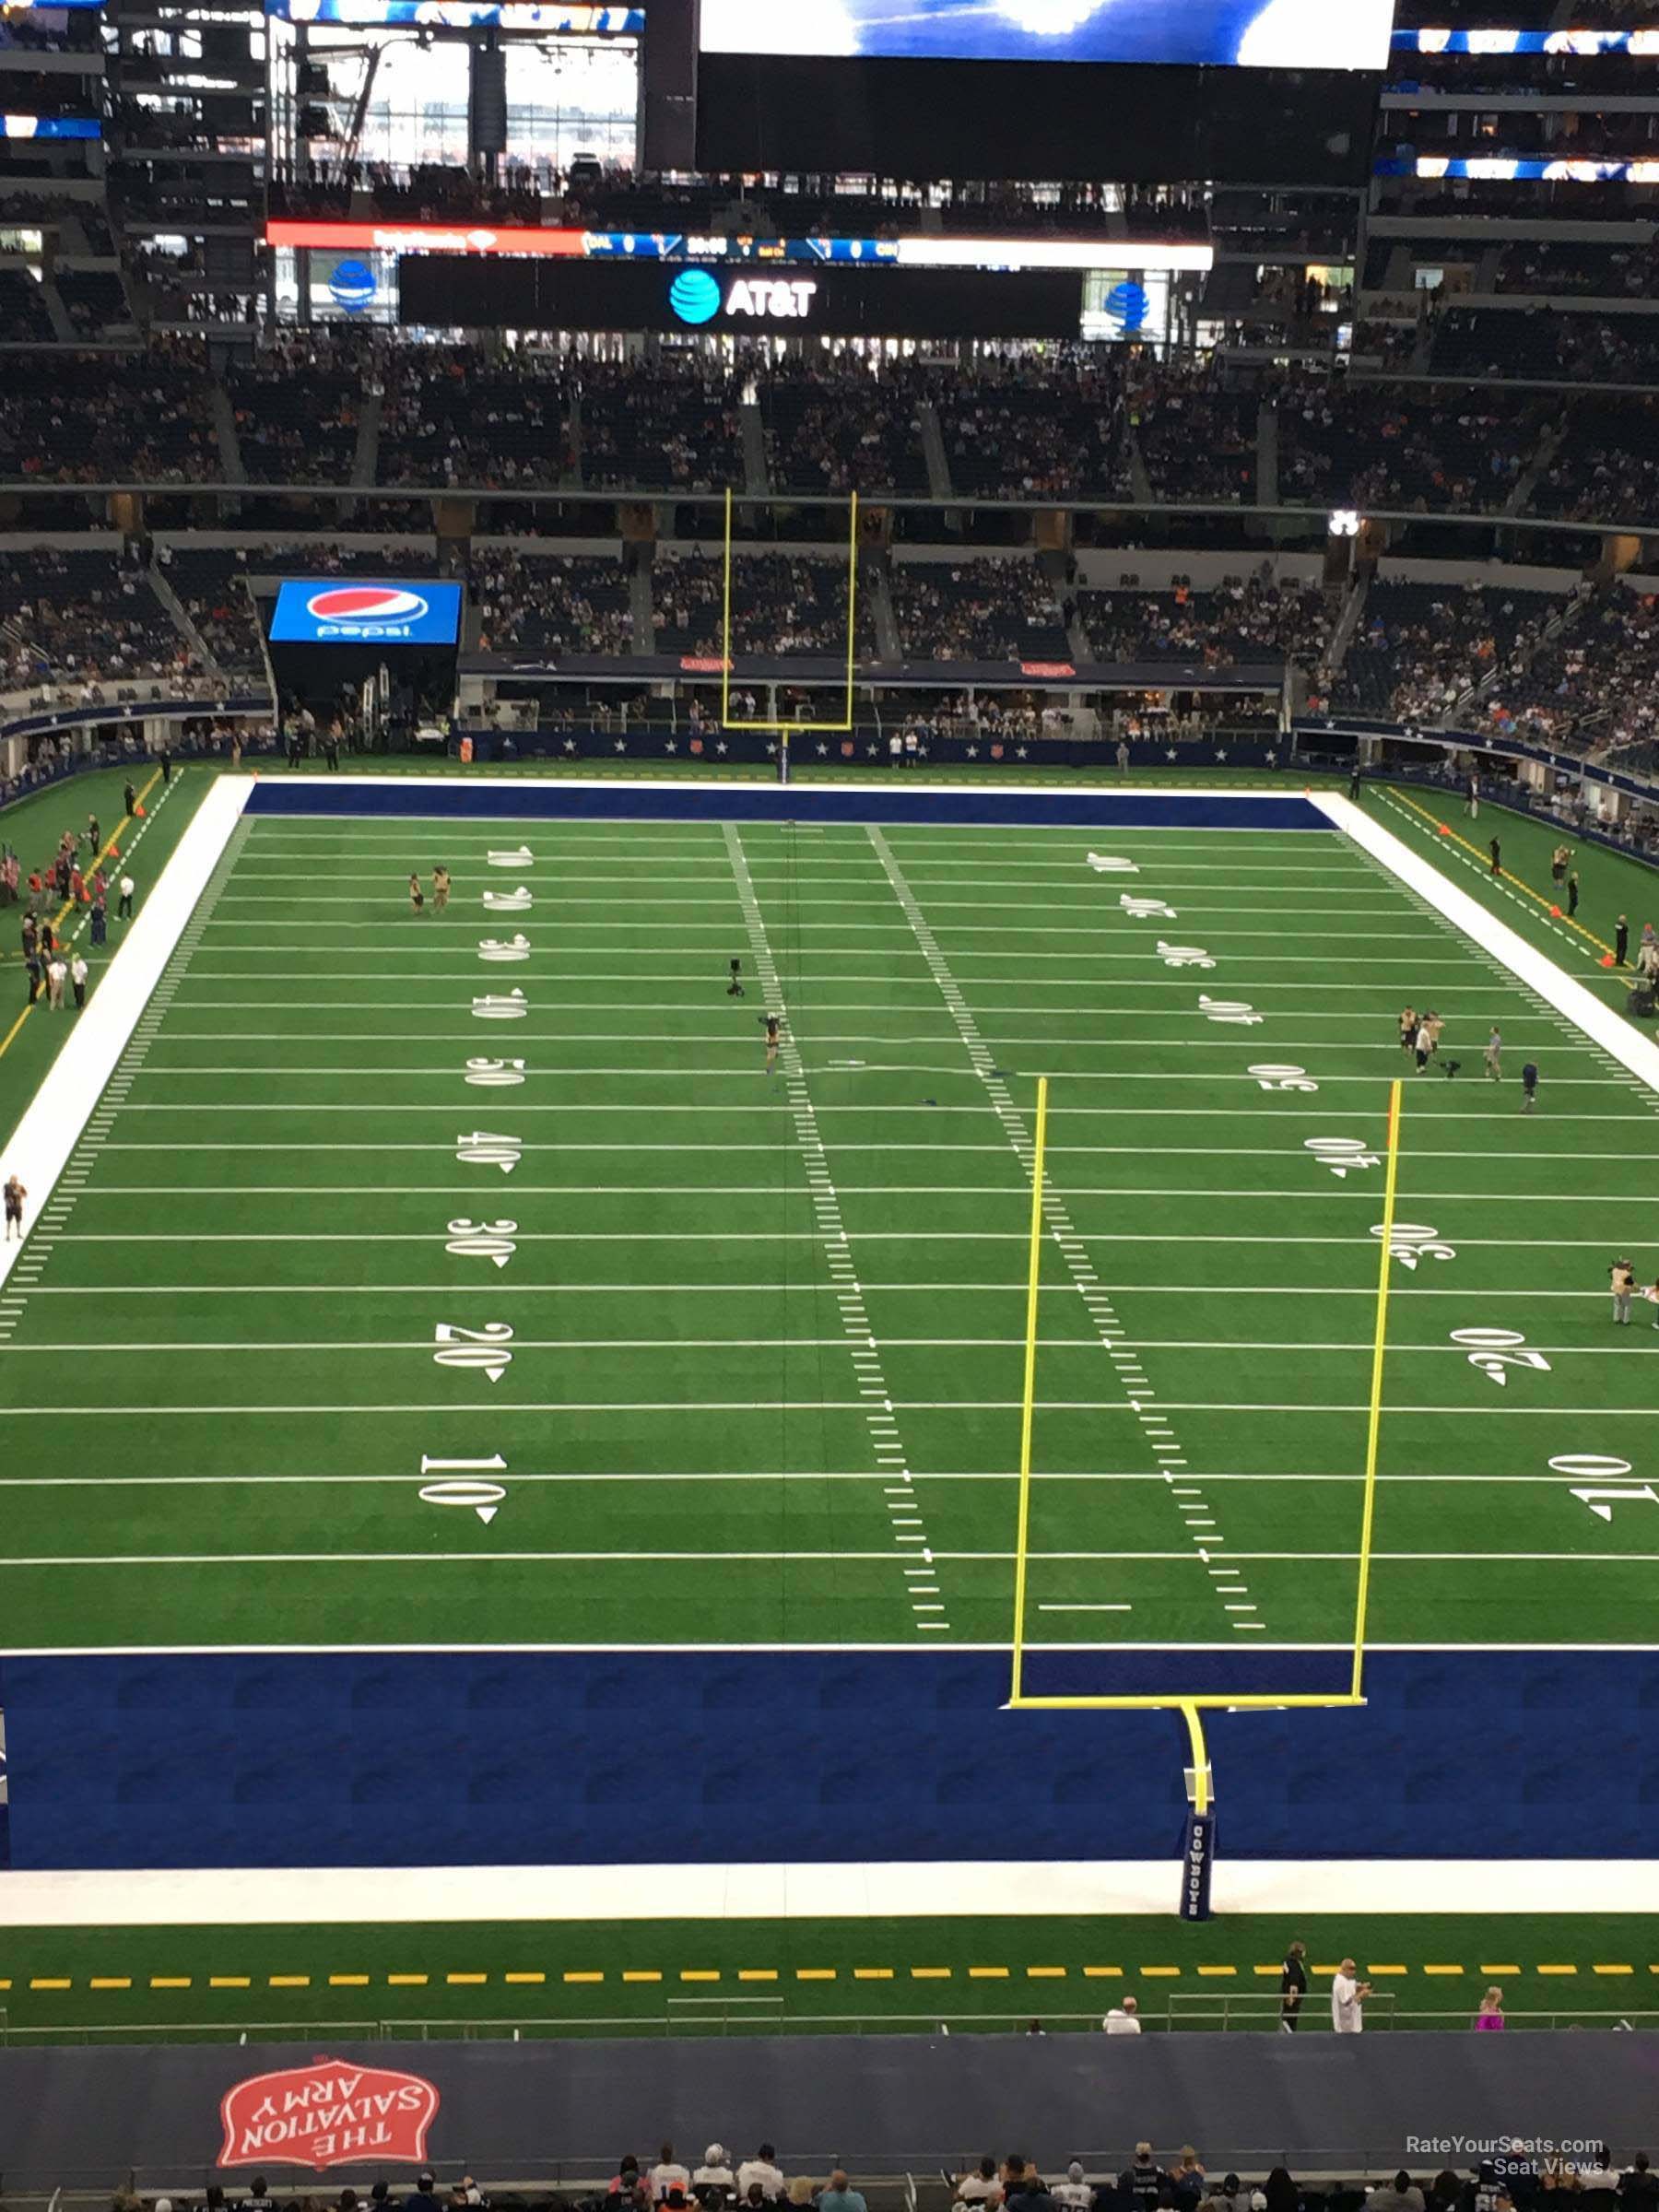 section 324, row 3 seat view  for football - at&t stadium (cowboys stadium)